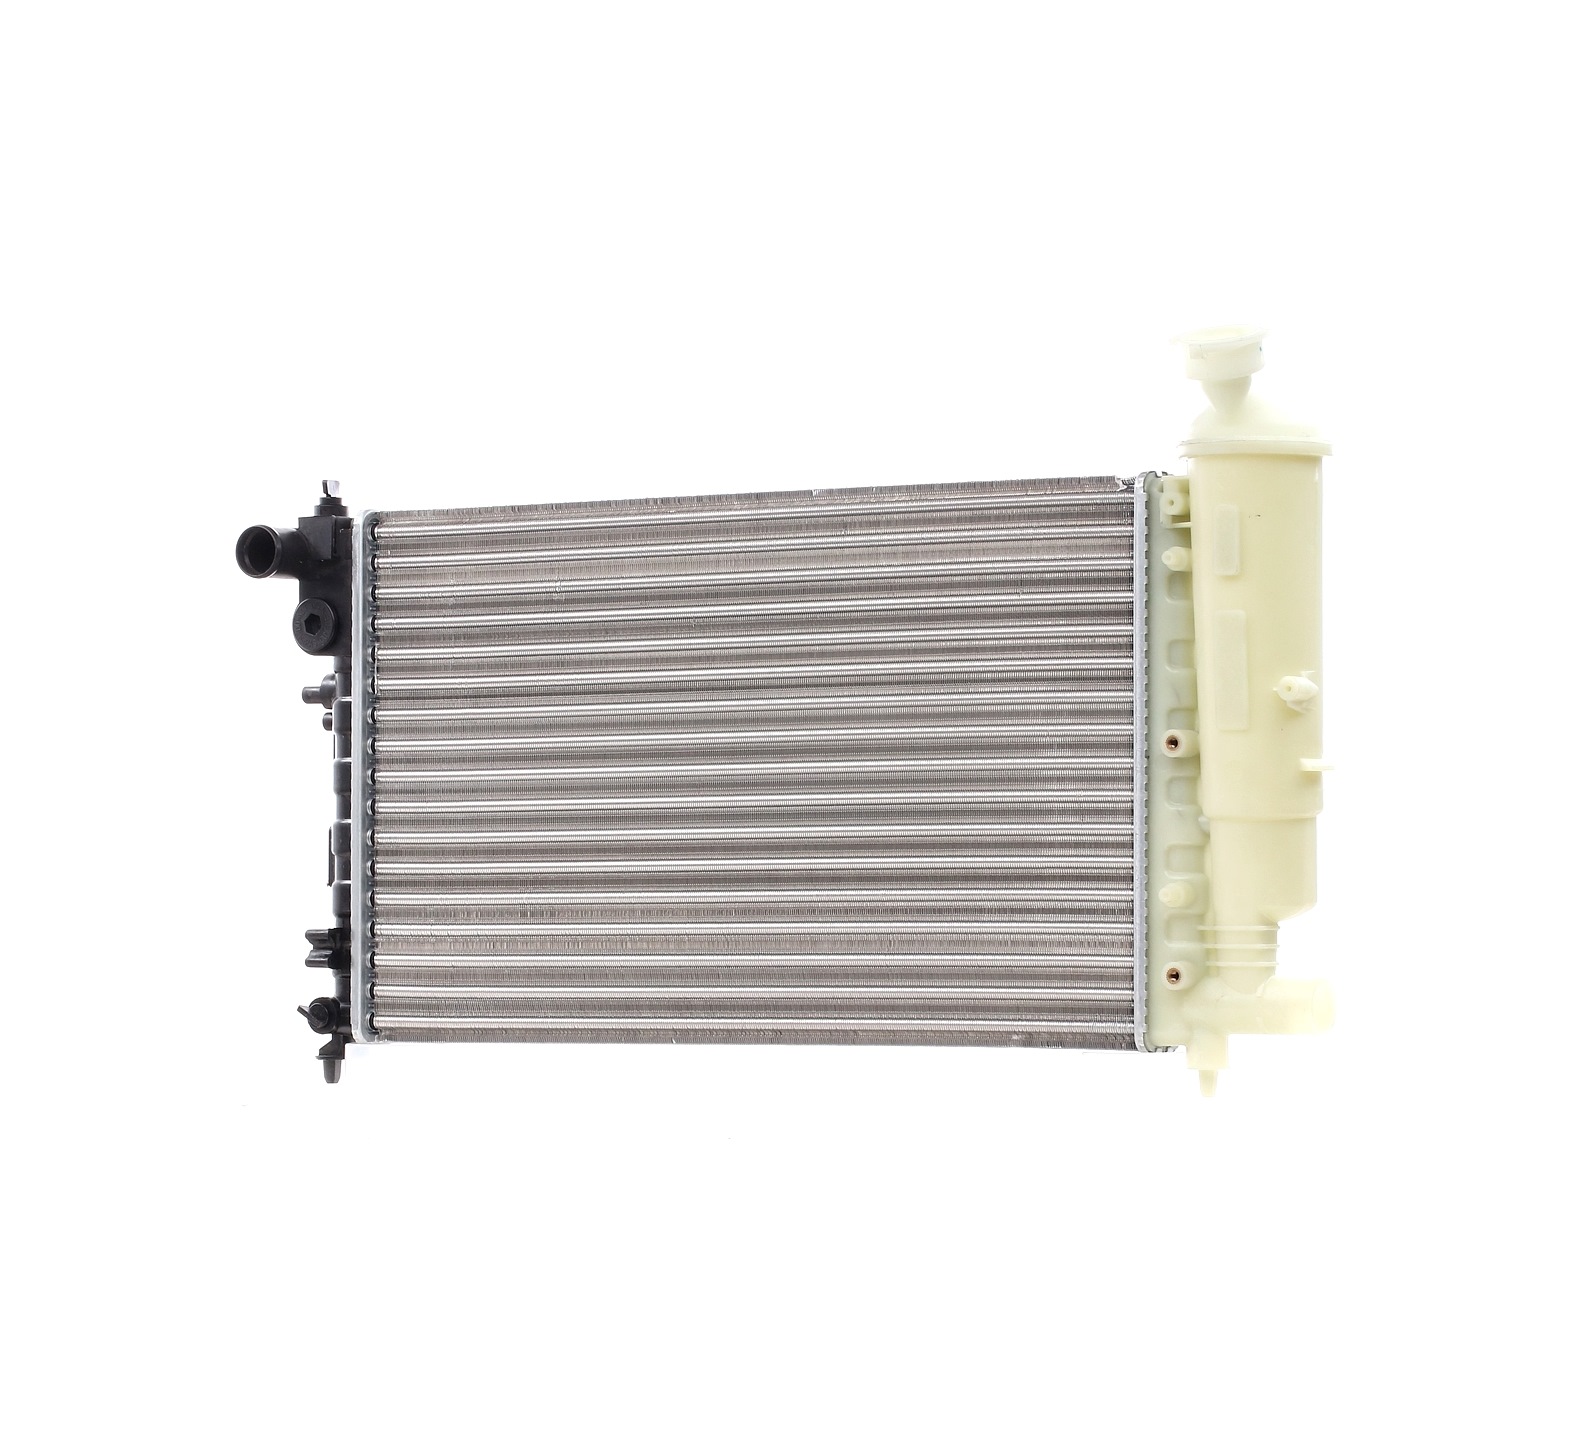 ABAKUS 009-017-0021 Engine radiator Aluminium, for vehicles with air conditioning, 531 x 322 x 23 mm, Manual Transmission